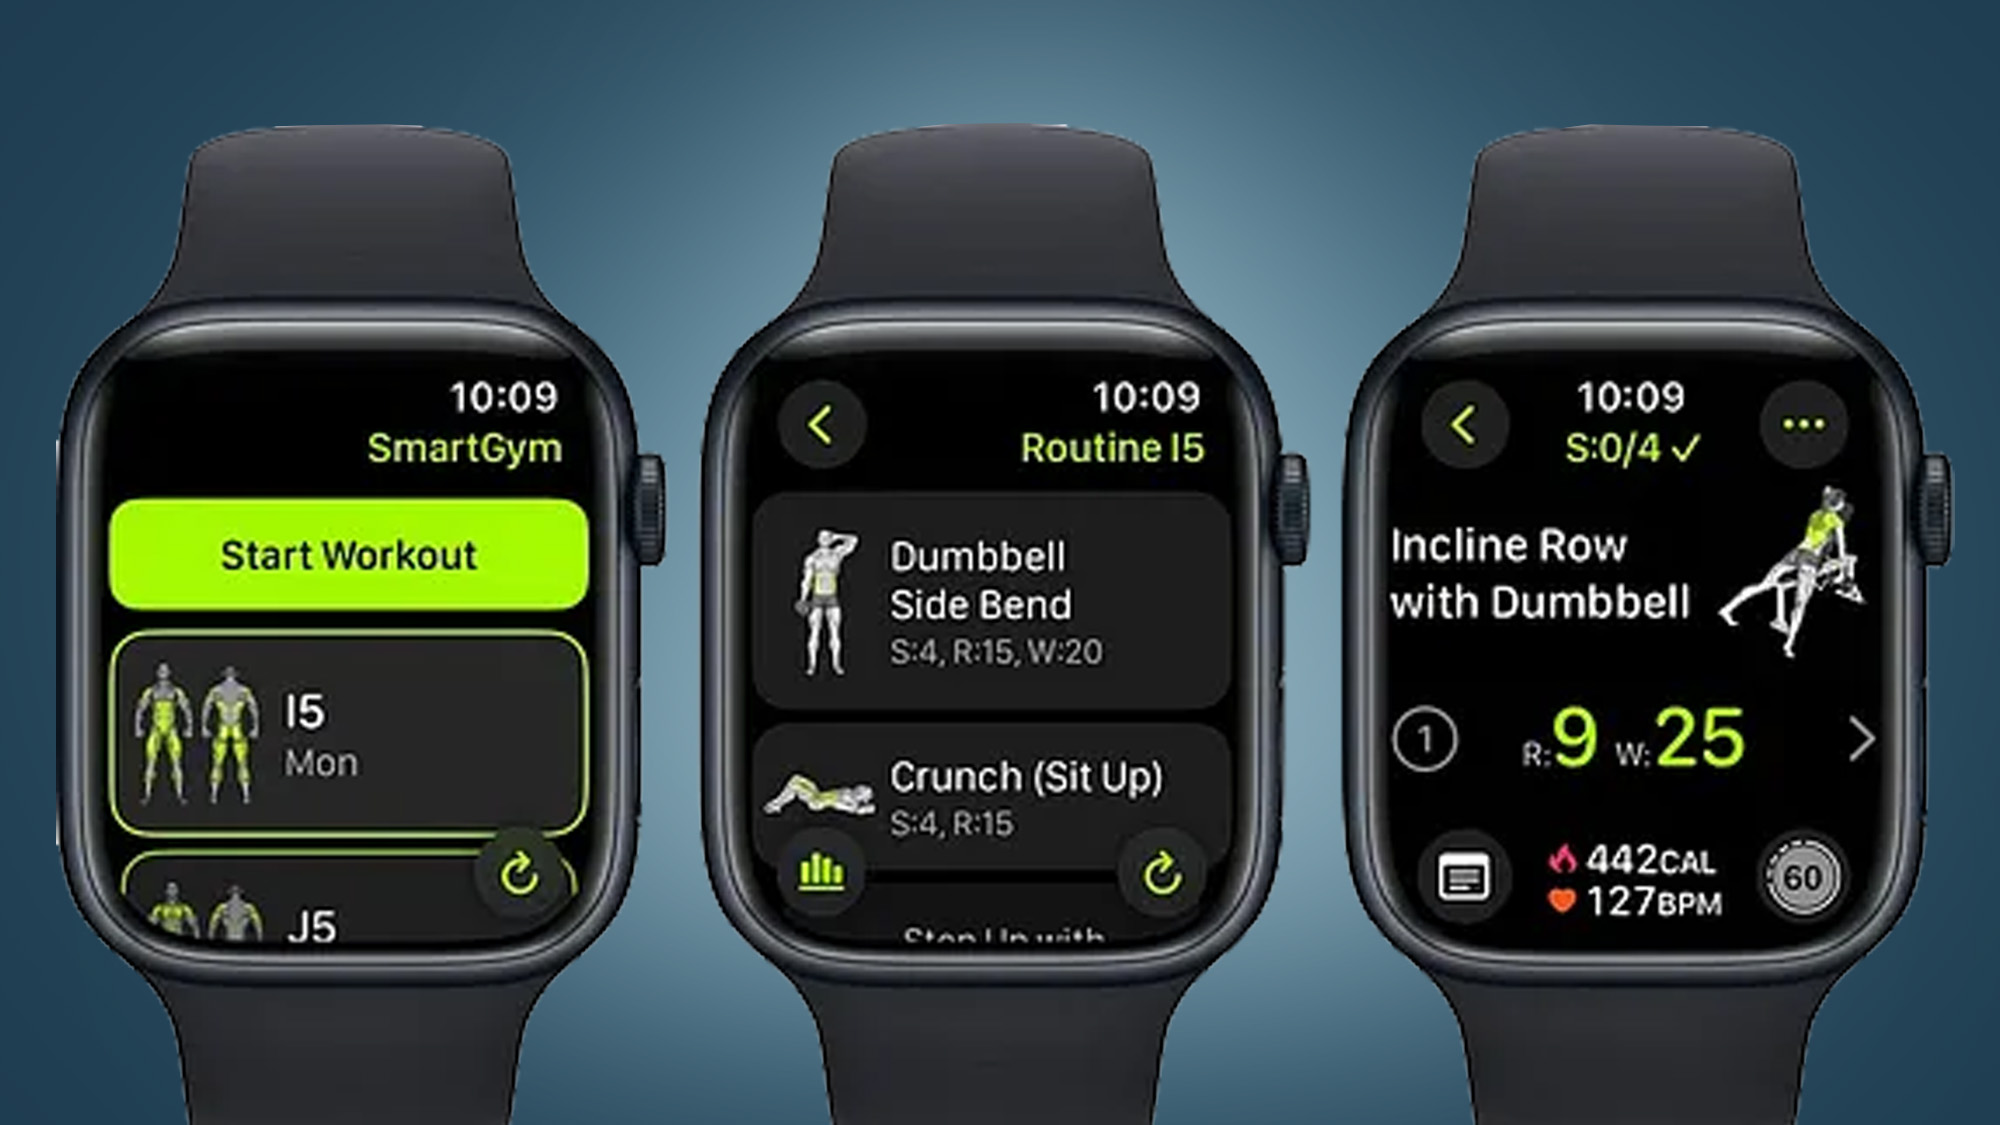 Three Apple Watches on a blue background showing the SmartGym app